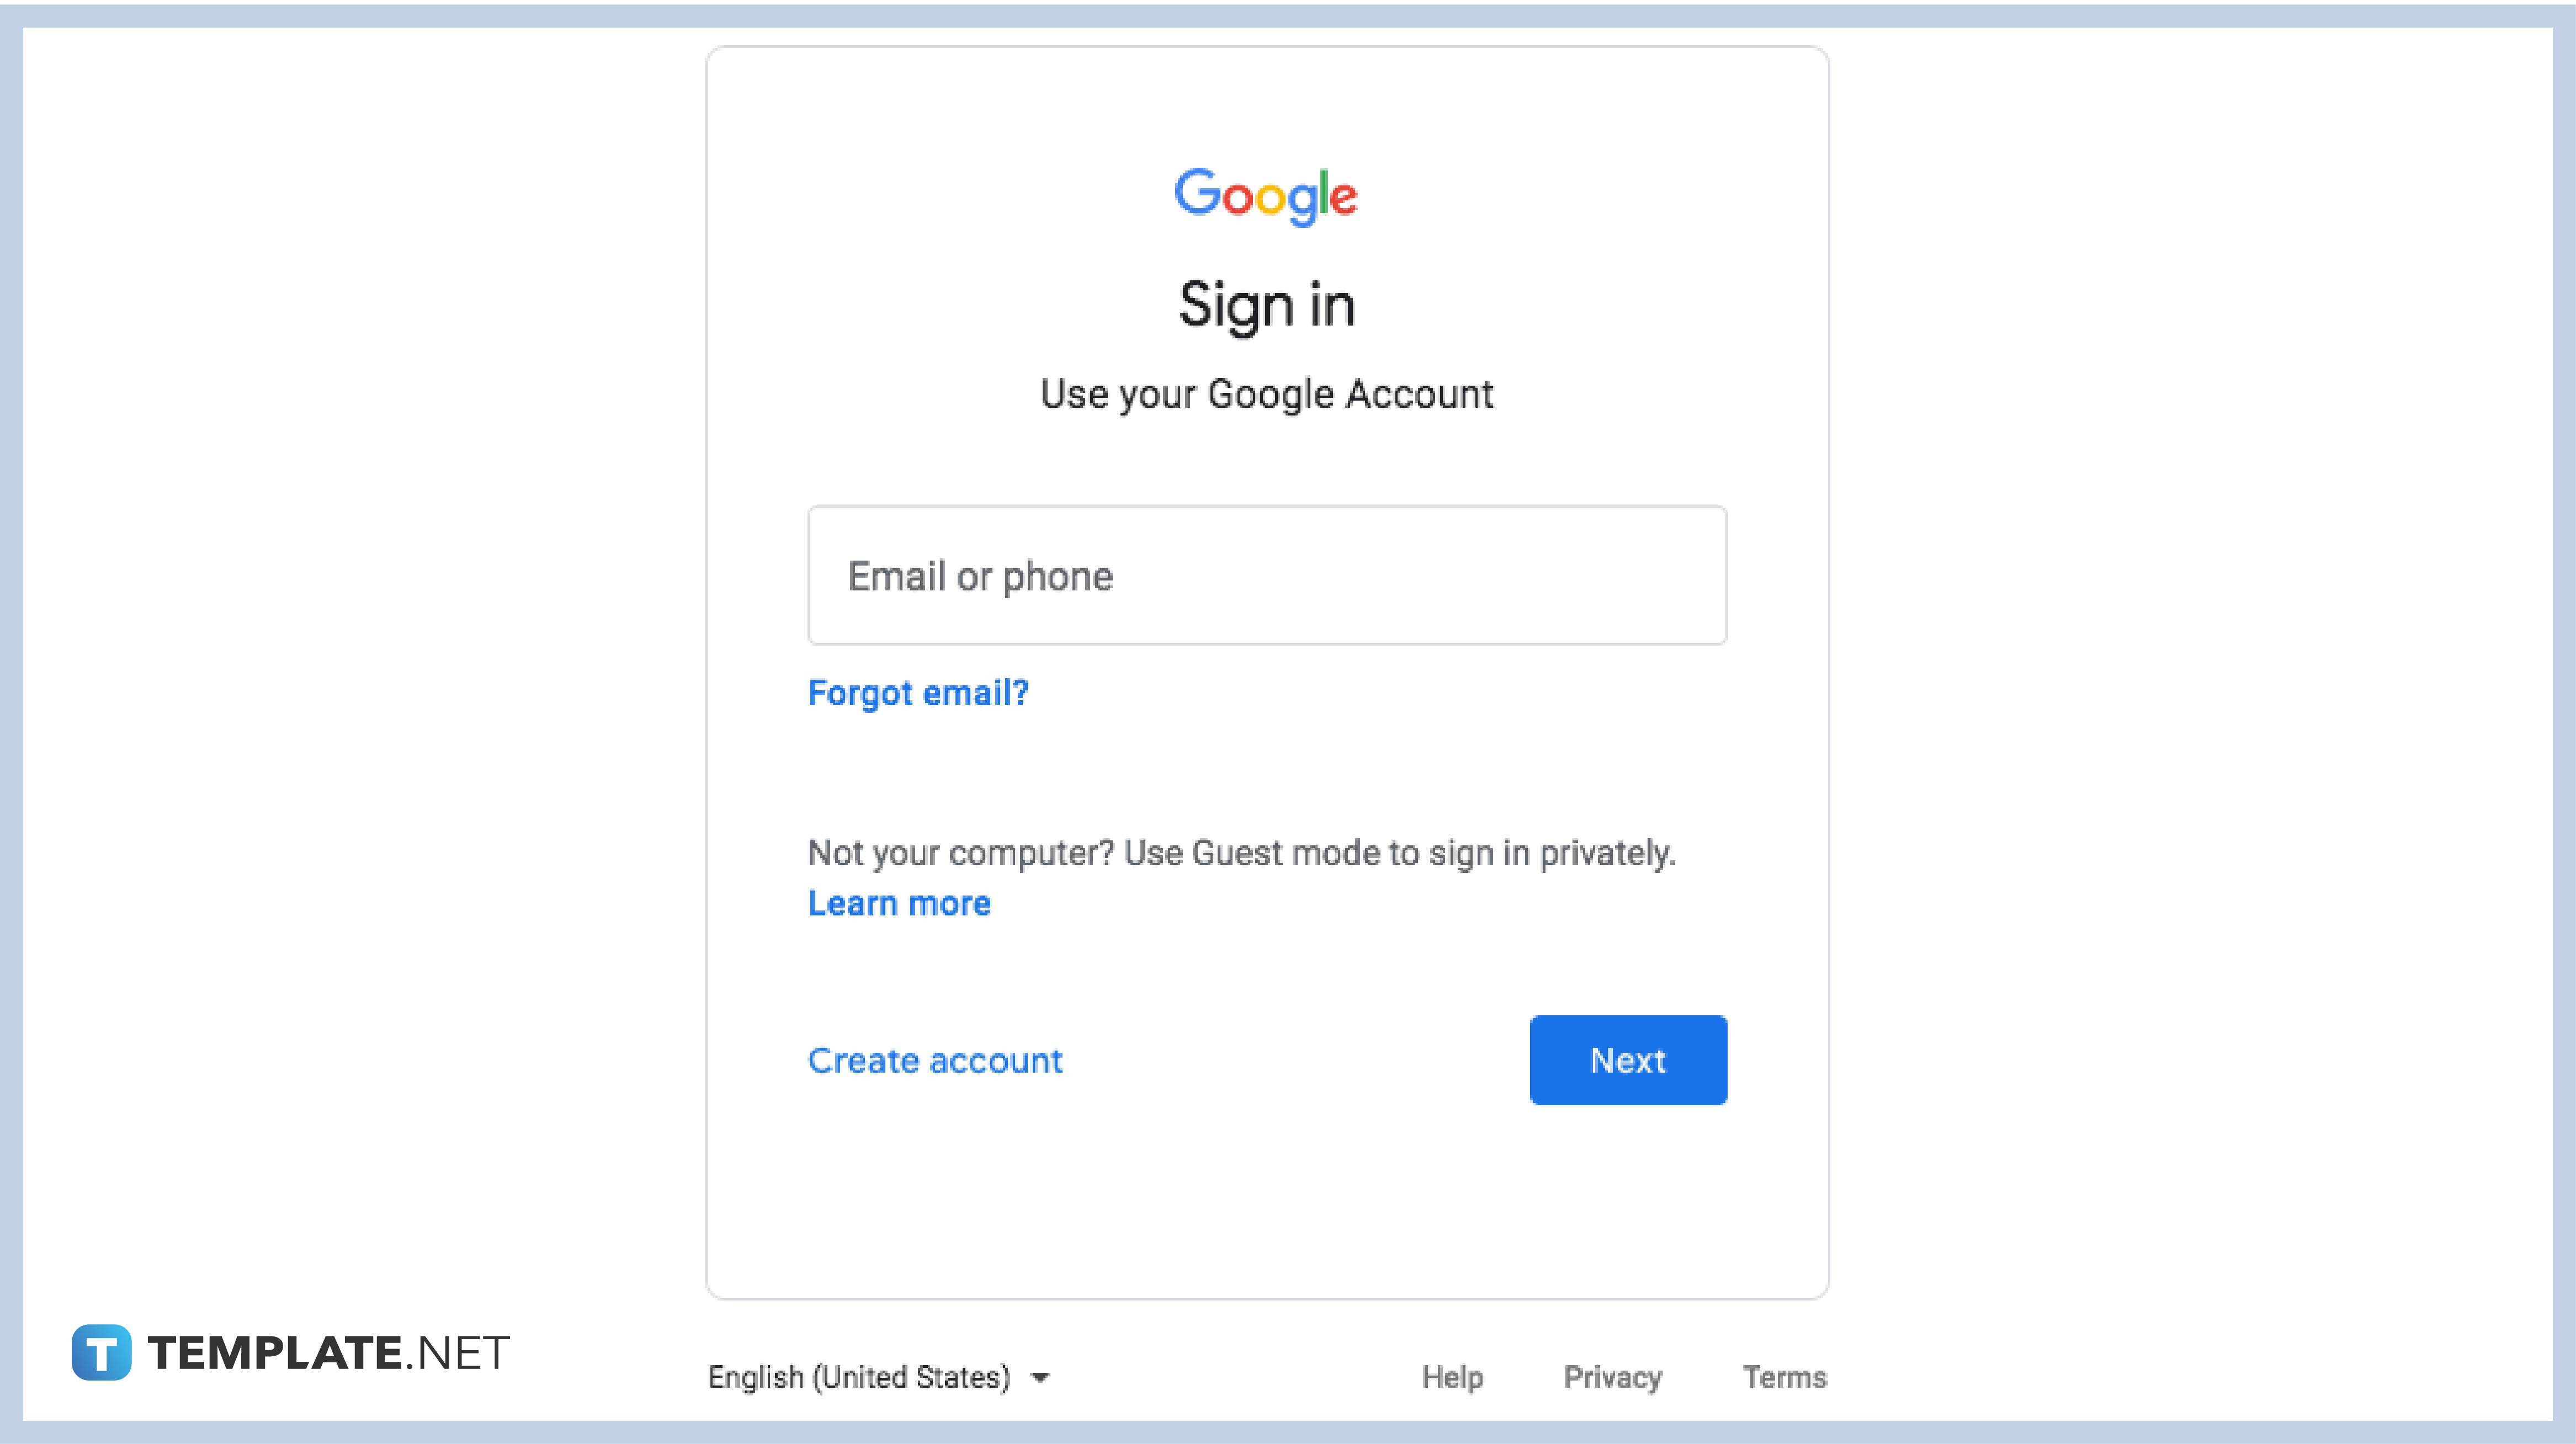 step-1-sign-in-with-your-google-account-01